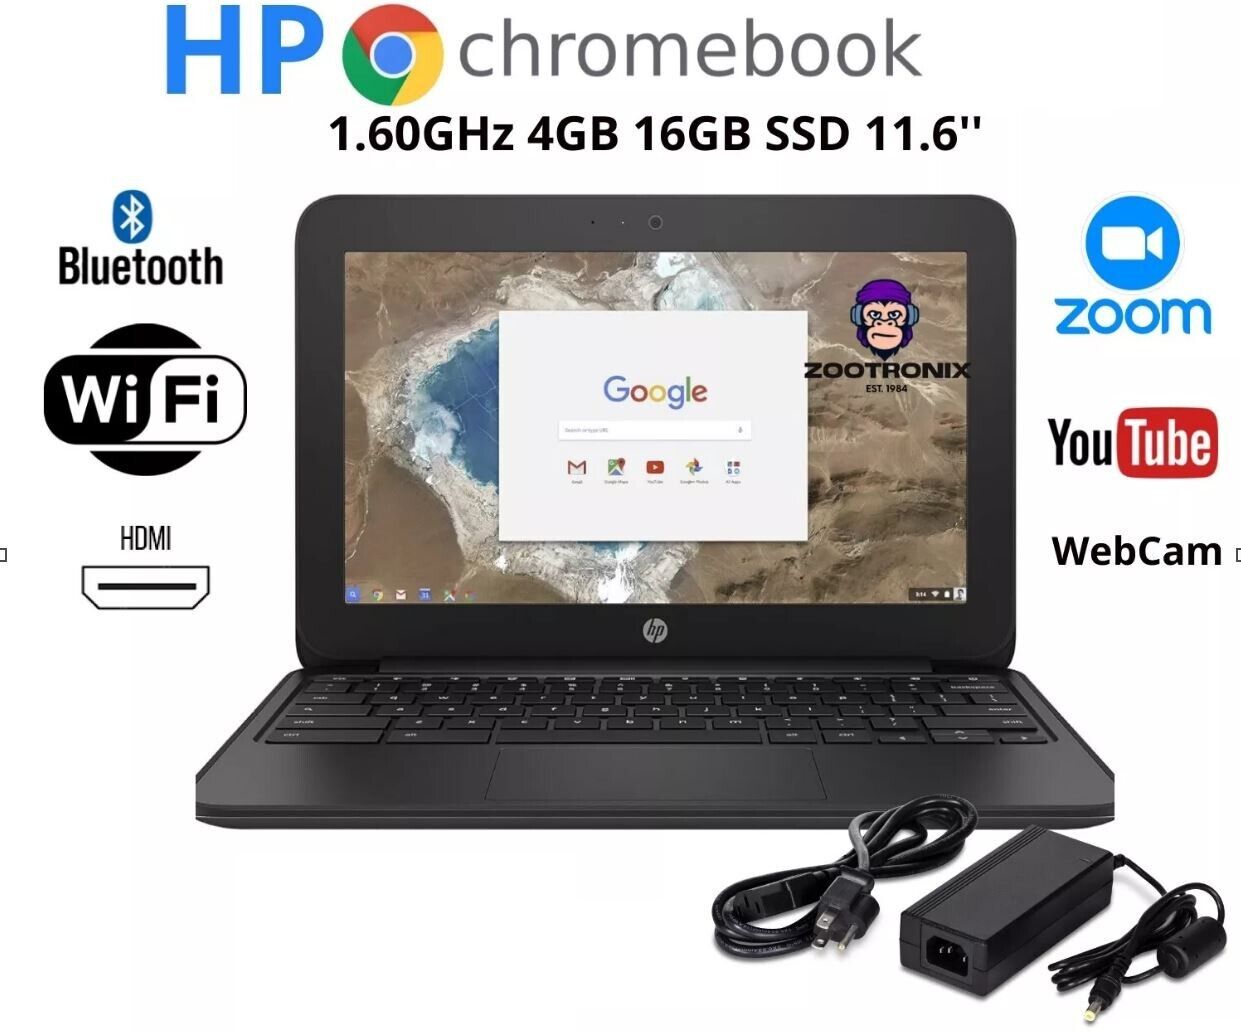 HP Chromebook 11 G6 EE Celeron N3350 1.60GHz 4GB RAM 16GB WITH CHARGER